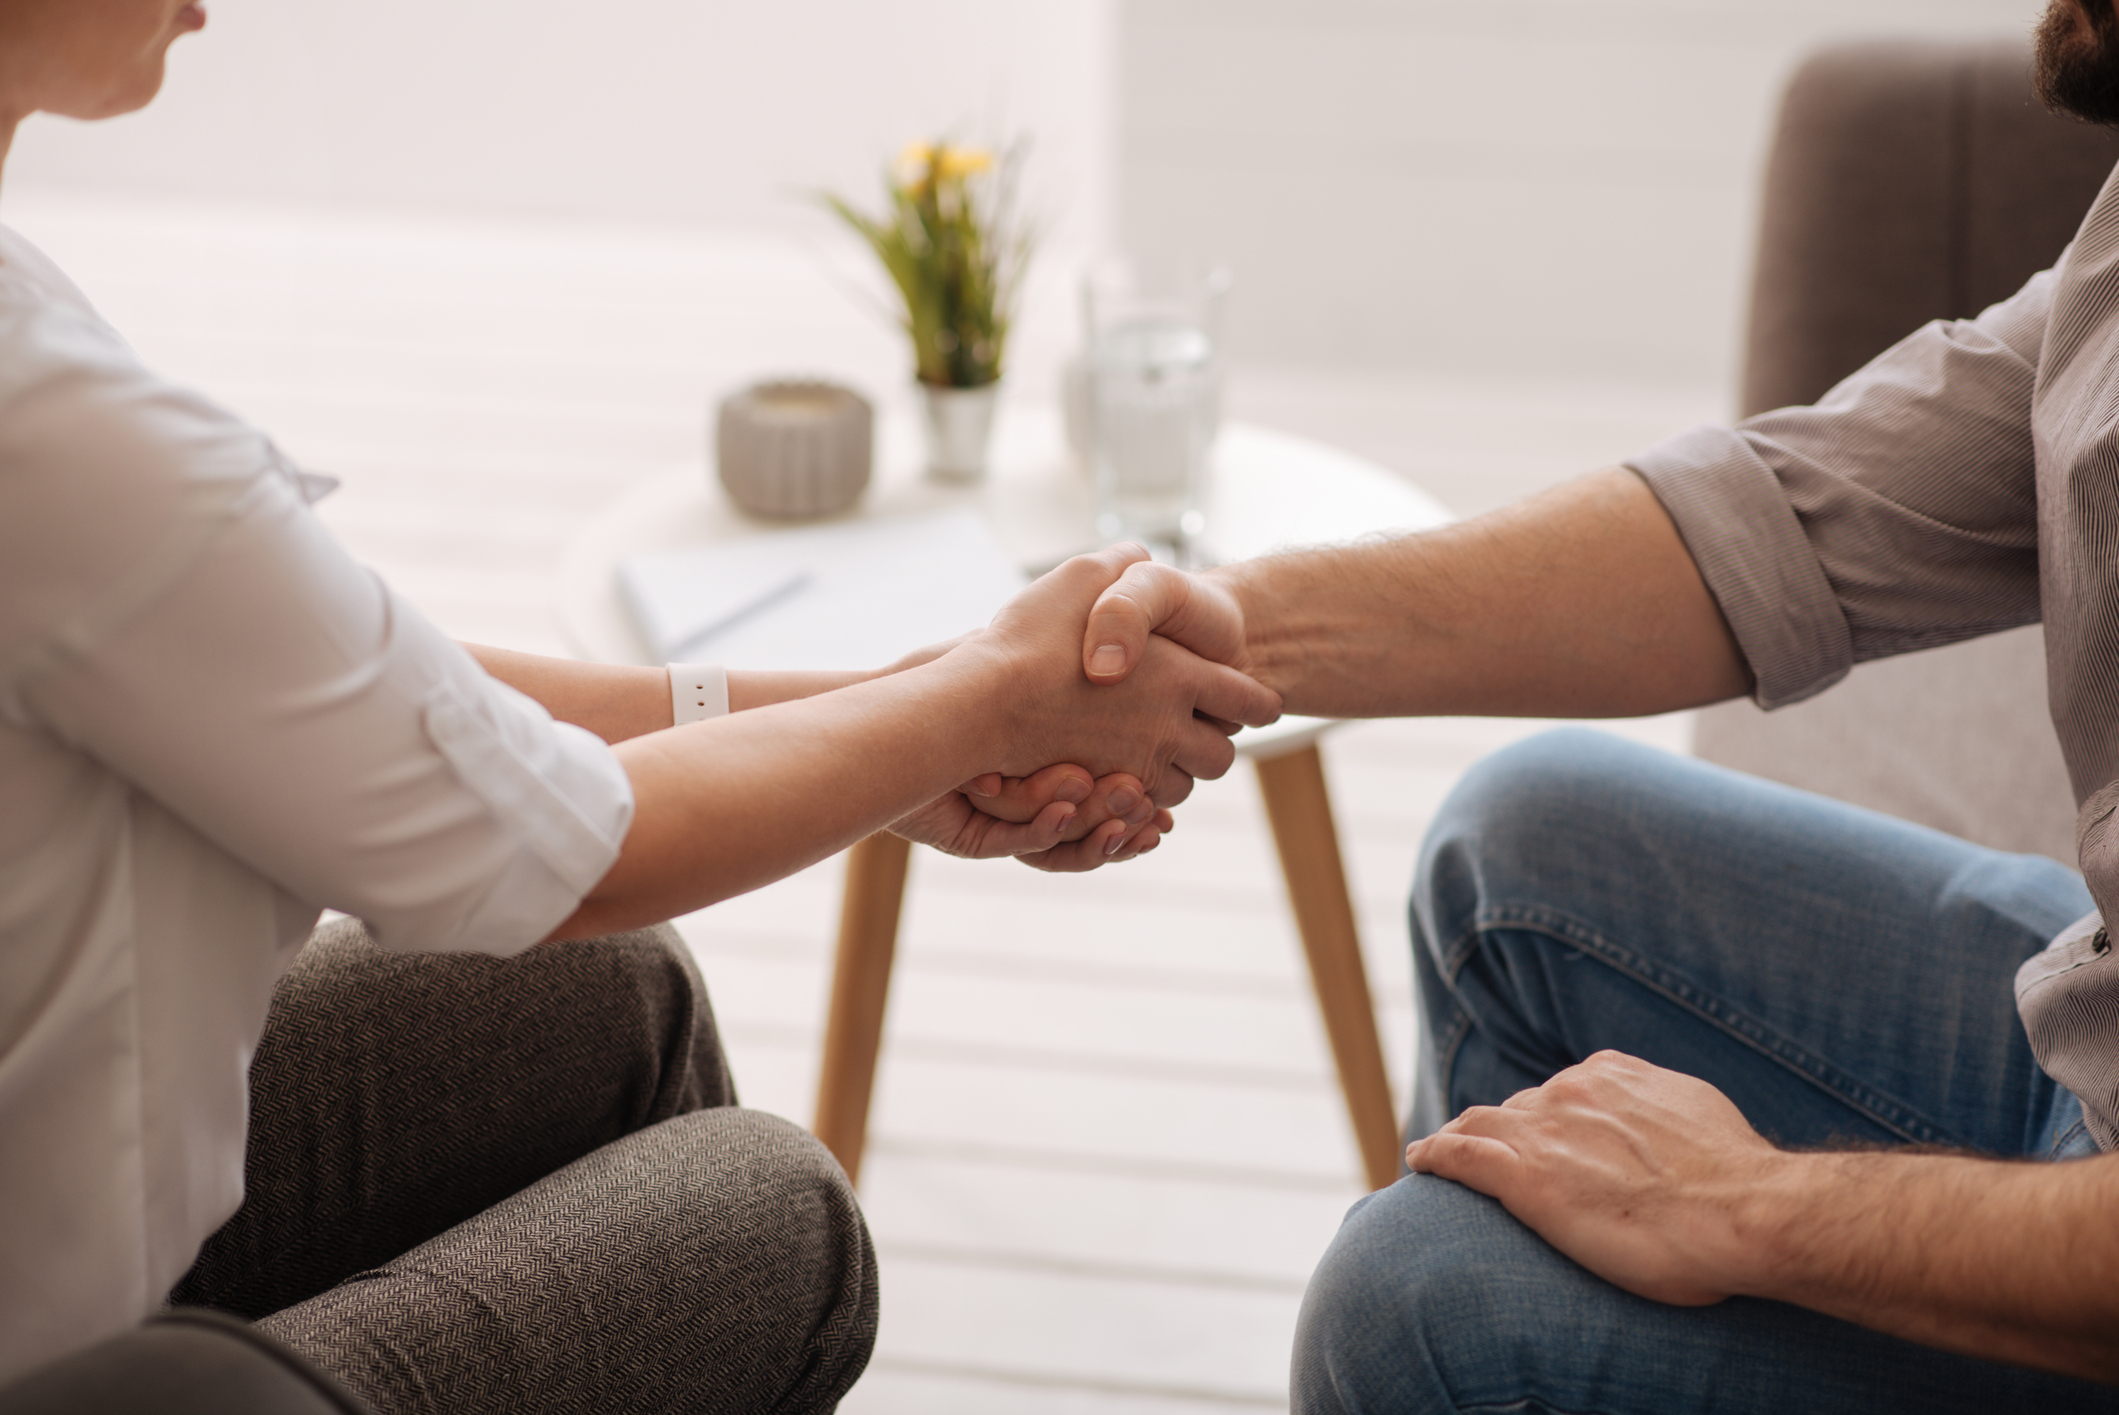 An adult in a psychotherapy session receiving a supportive handshake.